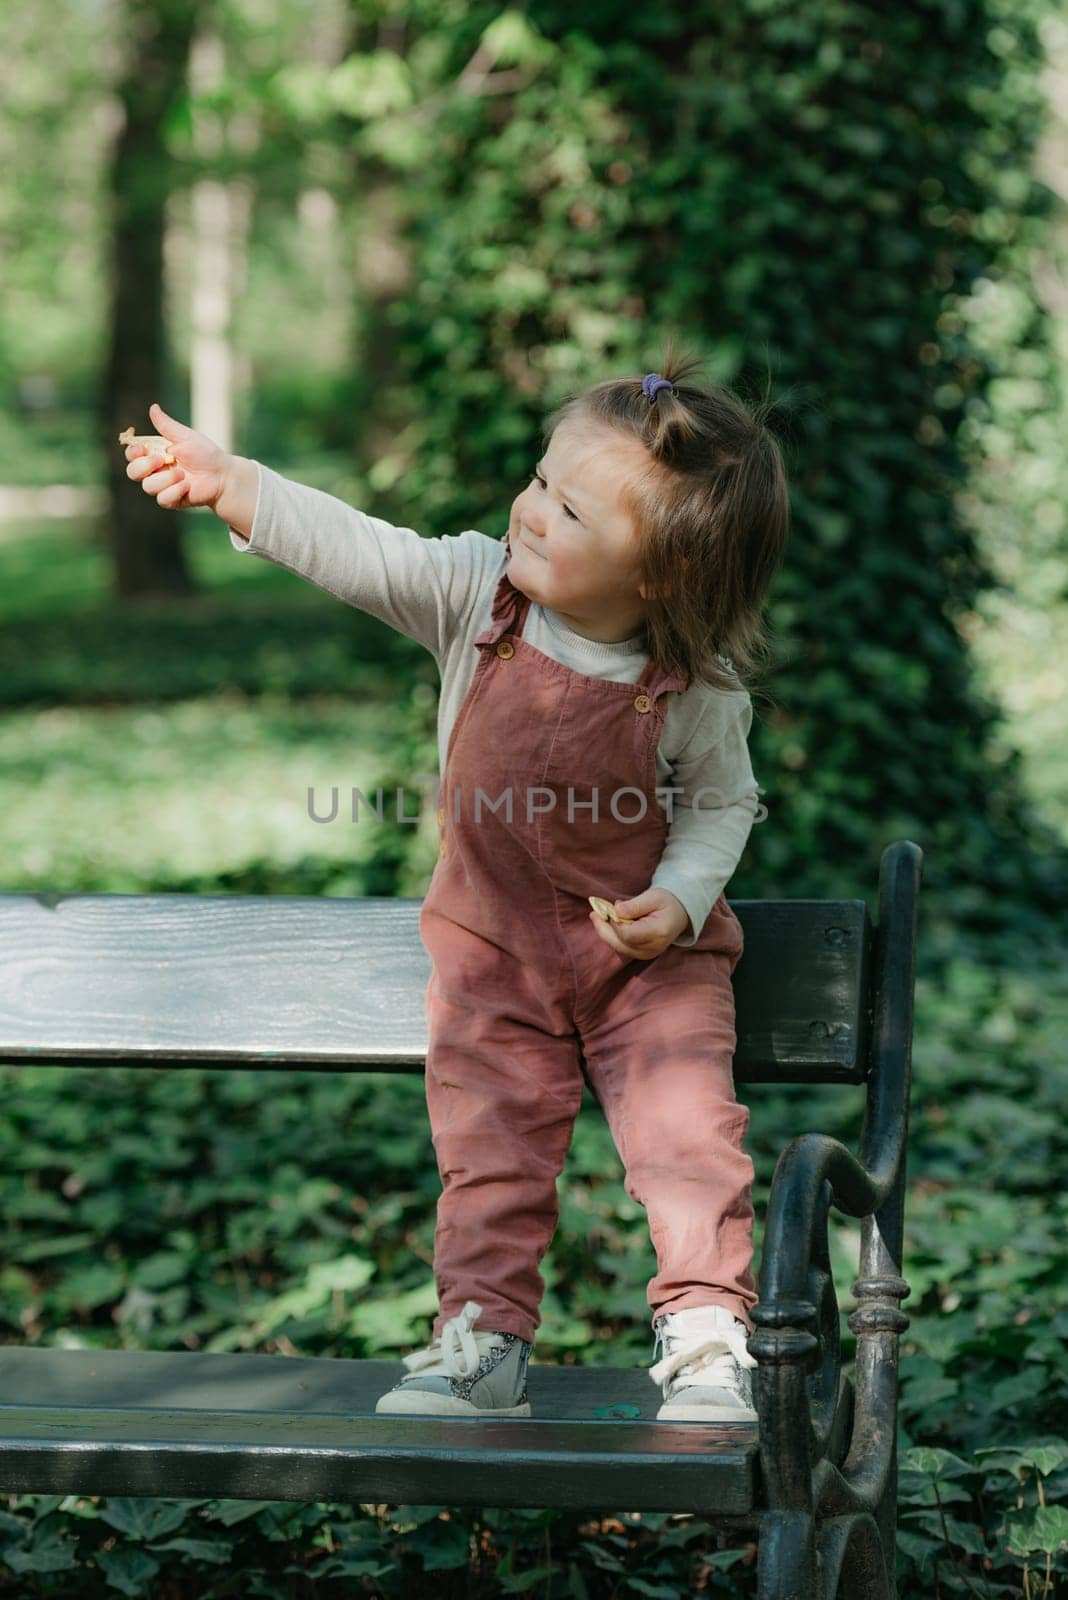 A female toddler in a velvet overall holds out a cookie on the garden bench. A baby girl with a small ponytail is having fun in the park.